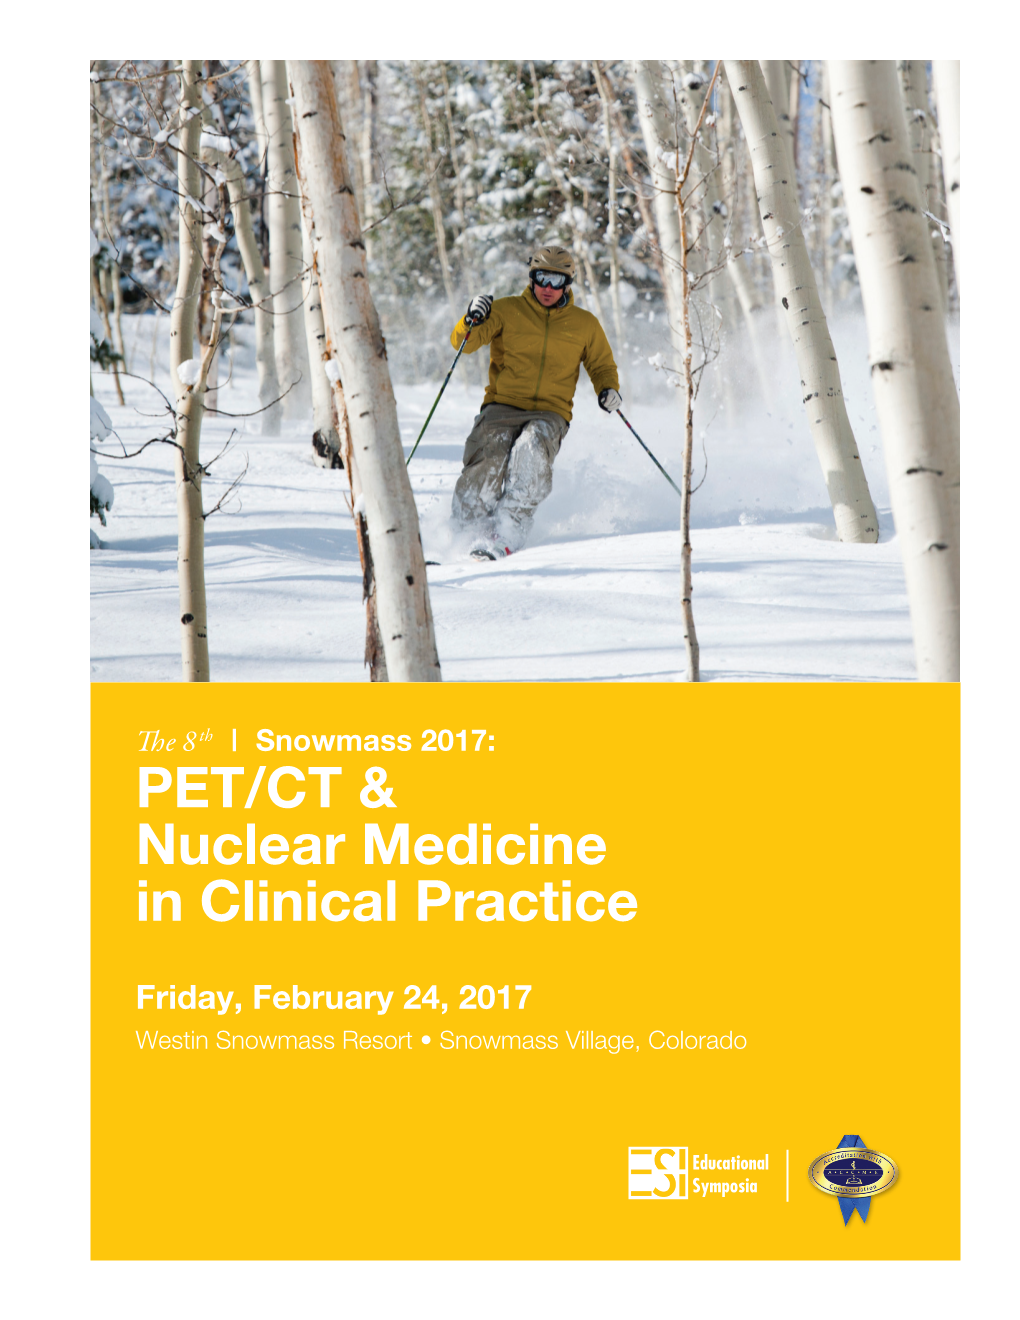 PET/CT & Nuclear Medicine in Clinical Practice